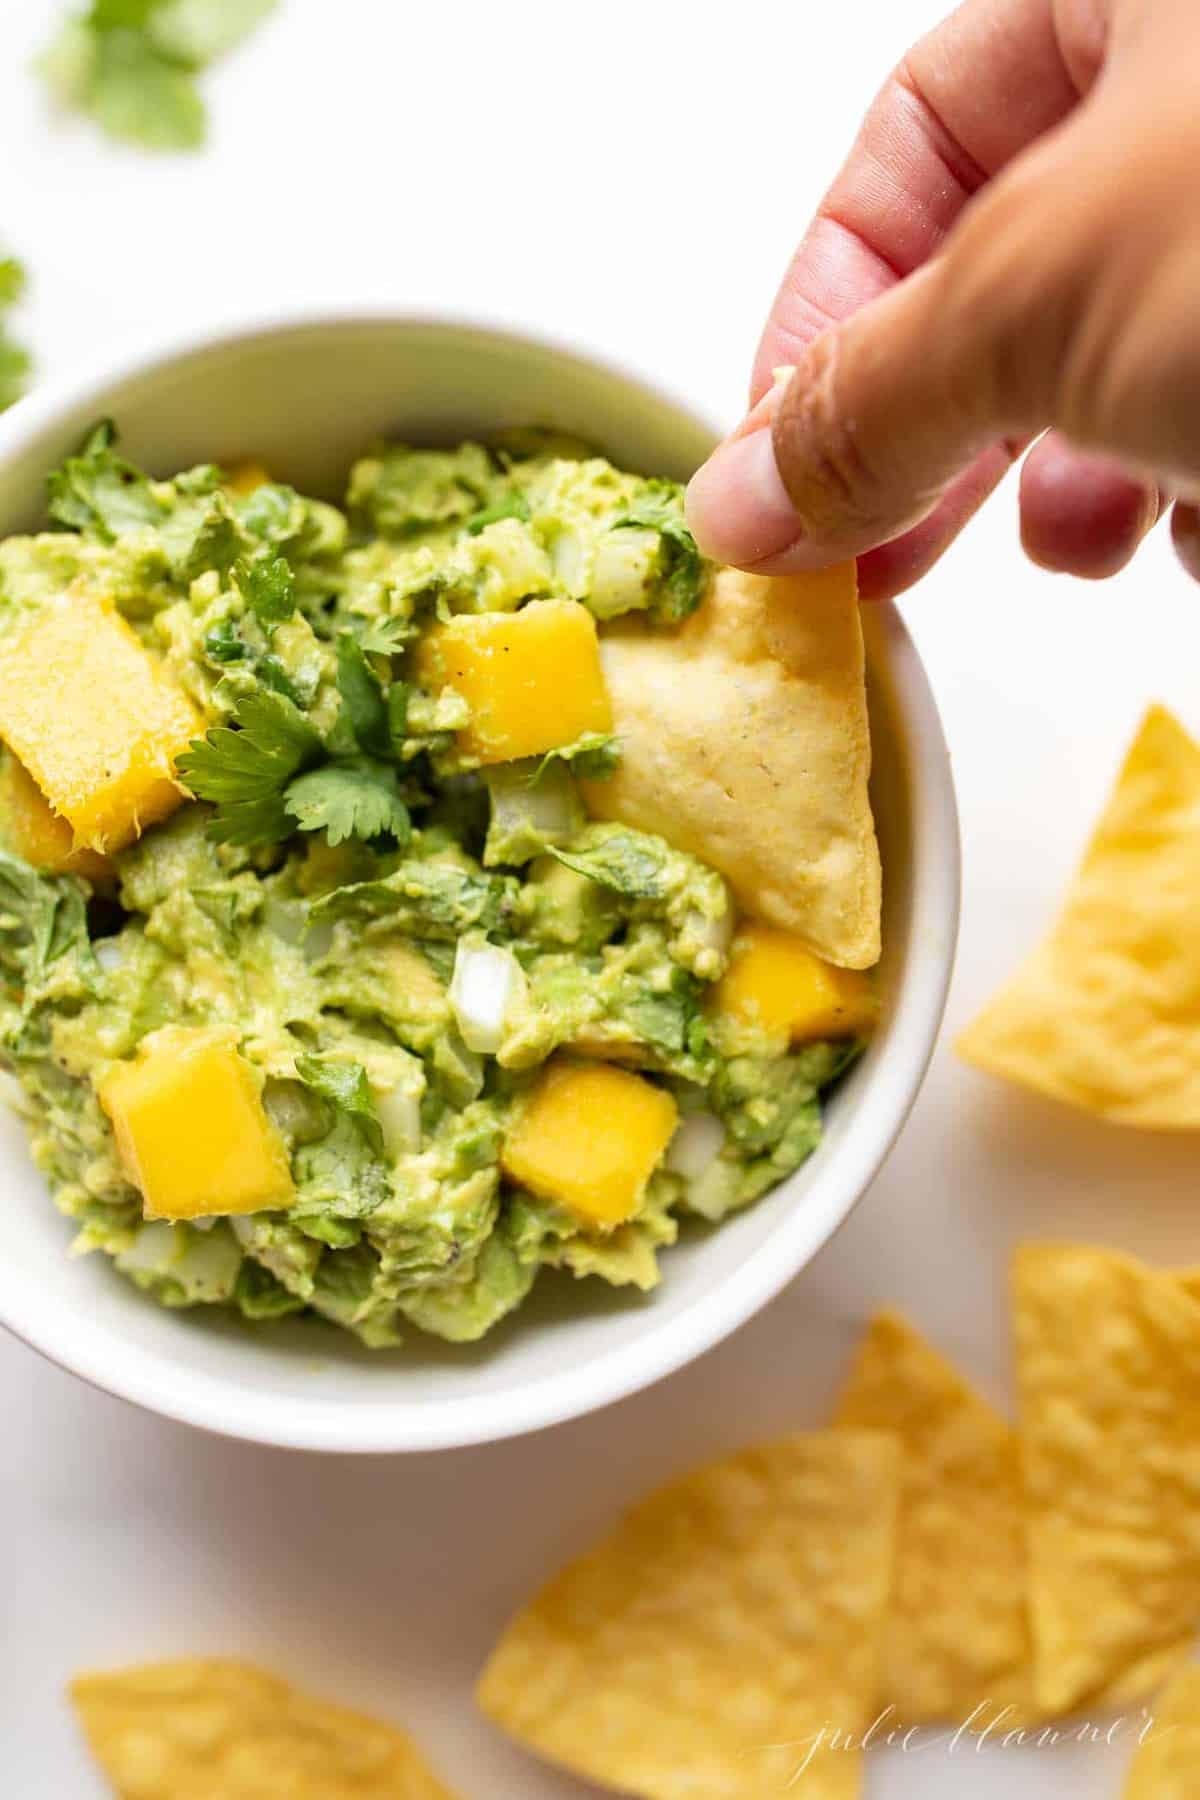 A white bowl on a marble surface full of mango guacamole, chips to the side and a hand reaching into the dip bowl.